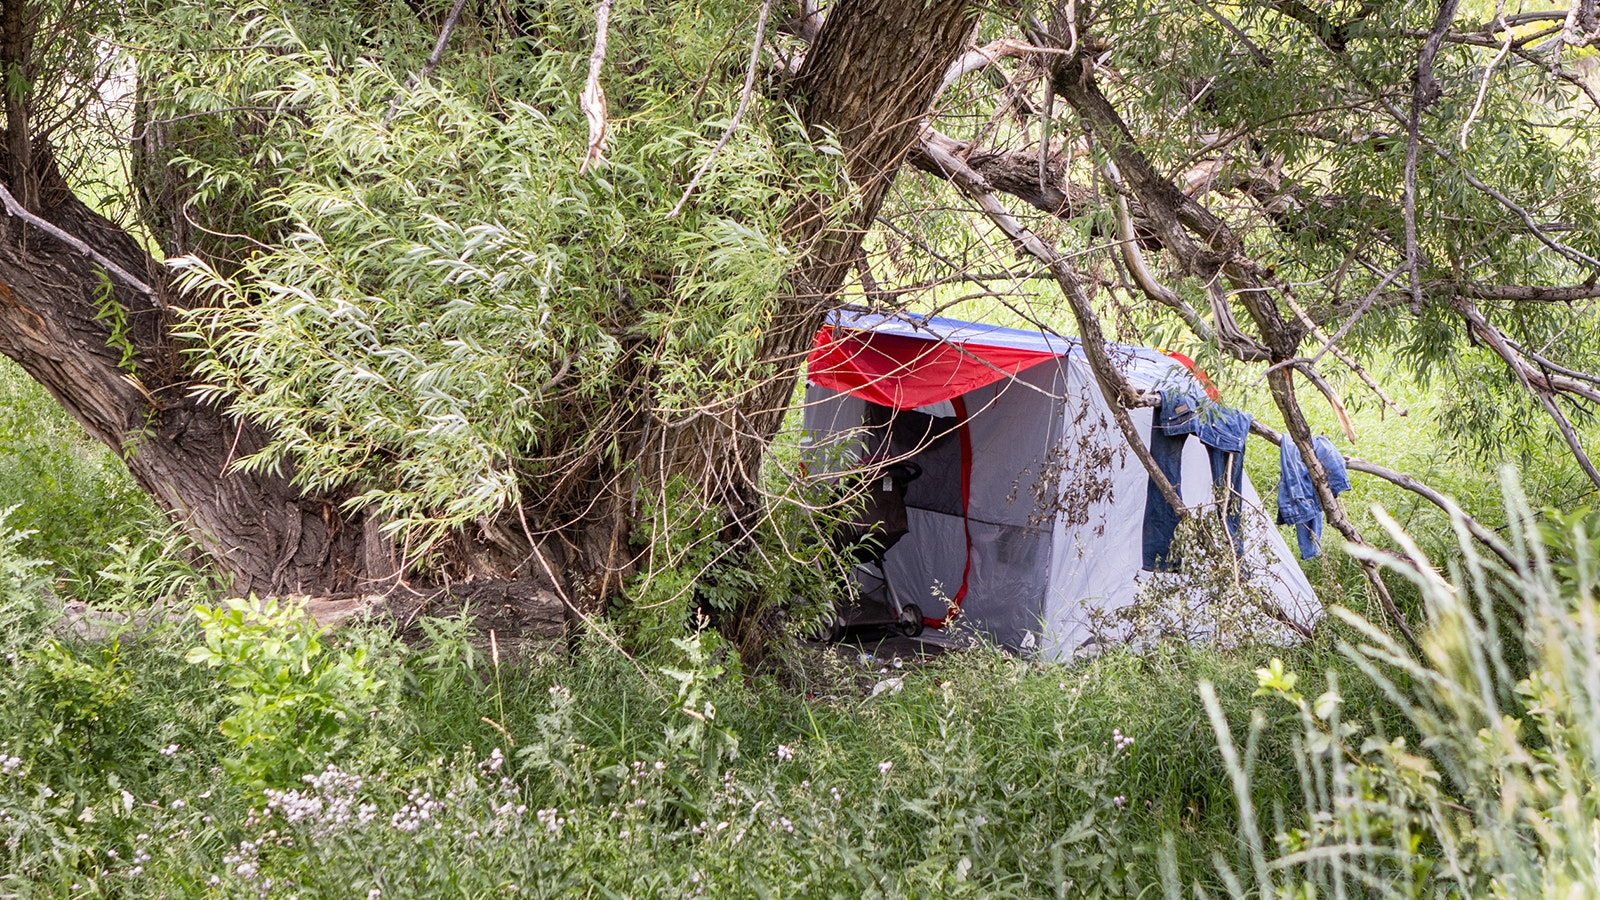 A tent is set up in the woods near the Trail's End area and Morrie Avenue in Cheyenne.